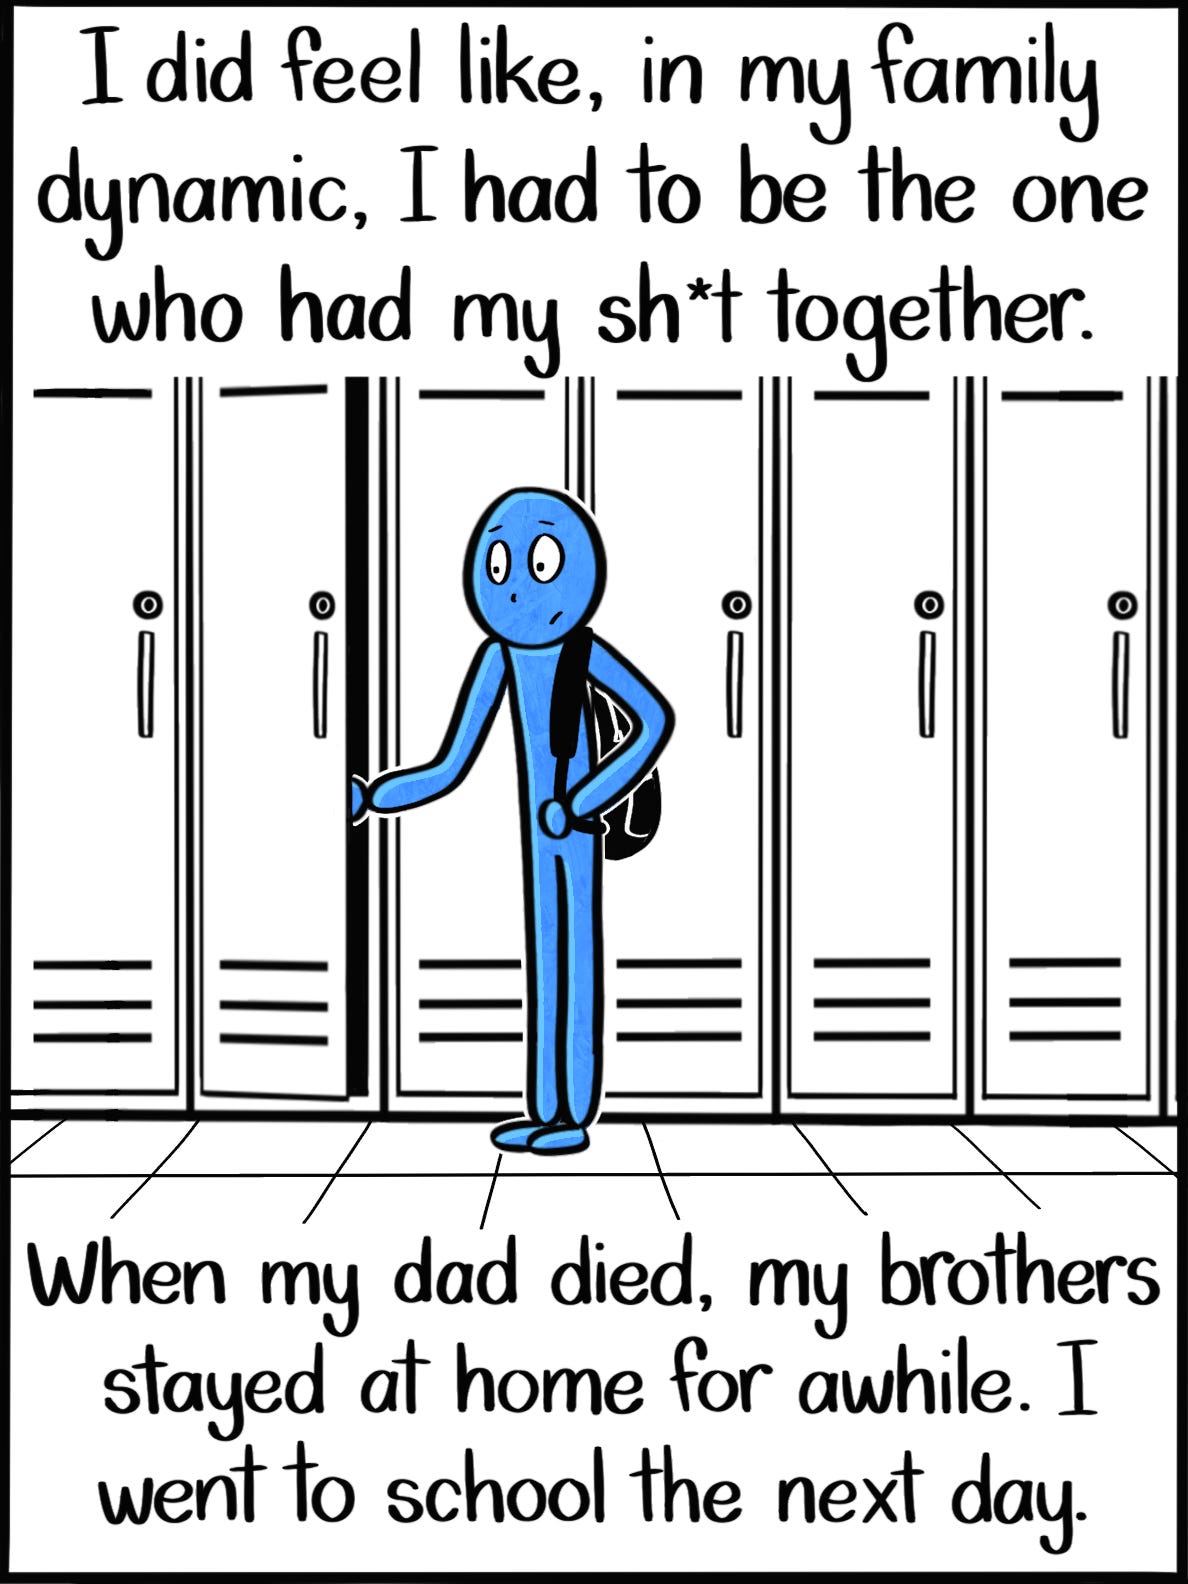 I did feel like, in my family dynamic, I had to be the one who had my sh*t together. When my dad died, my brothers stayed at home for awhile. I went to school the next day. Image: The Blue Person, one strap of their backpack around one shoulder, in the process of opening their locker at school.